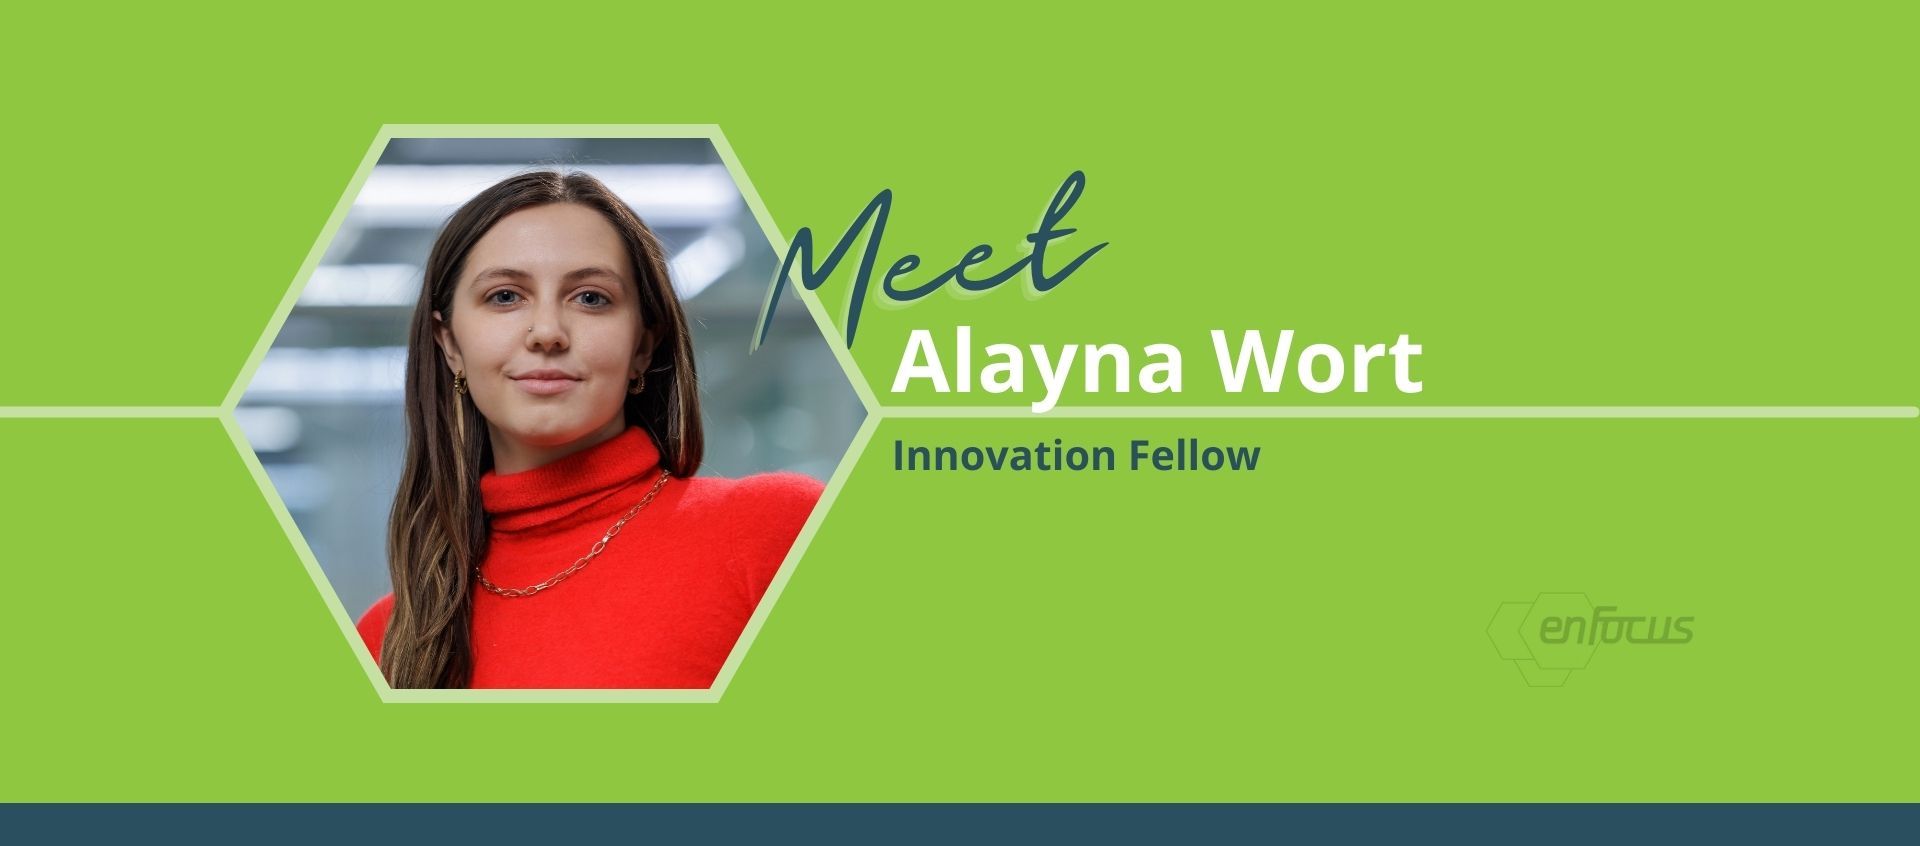 Reflecting on the Past, Alayna Looks Forward to Making an Impact in the Region